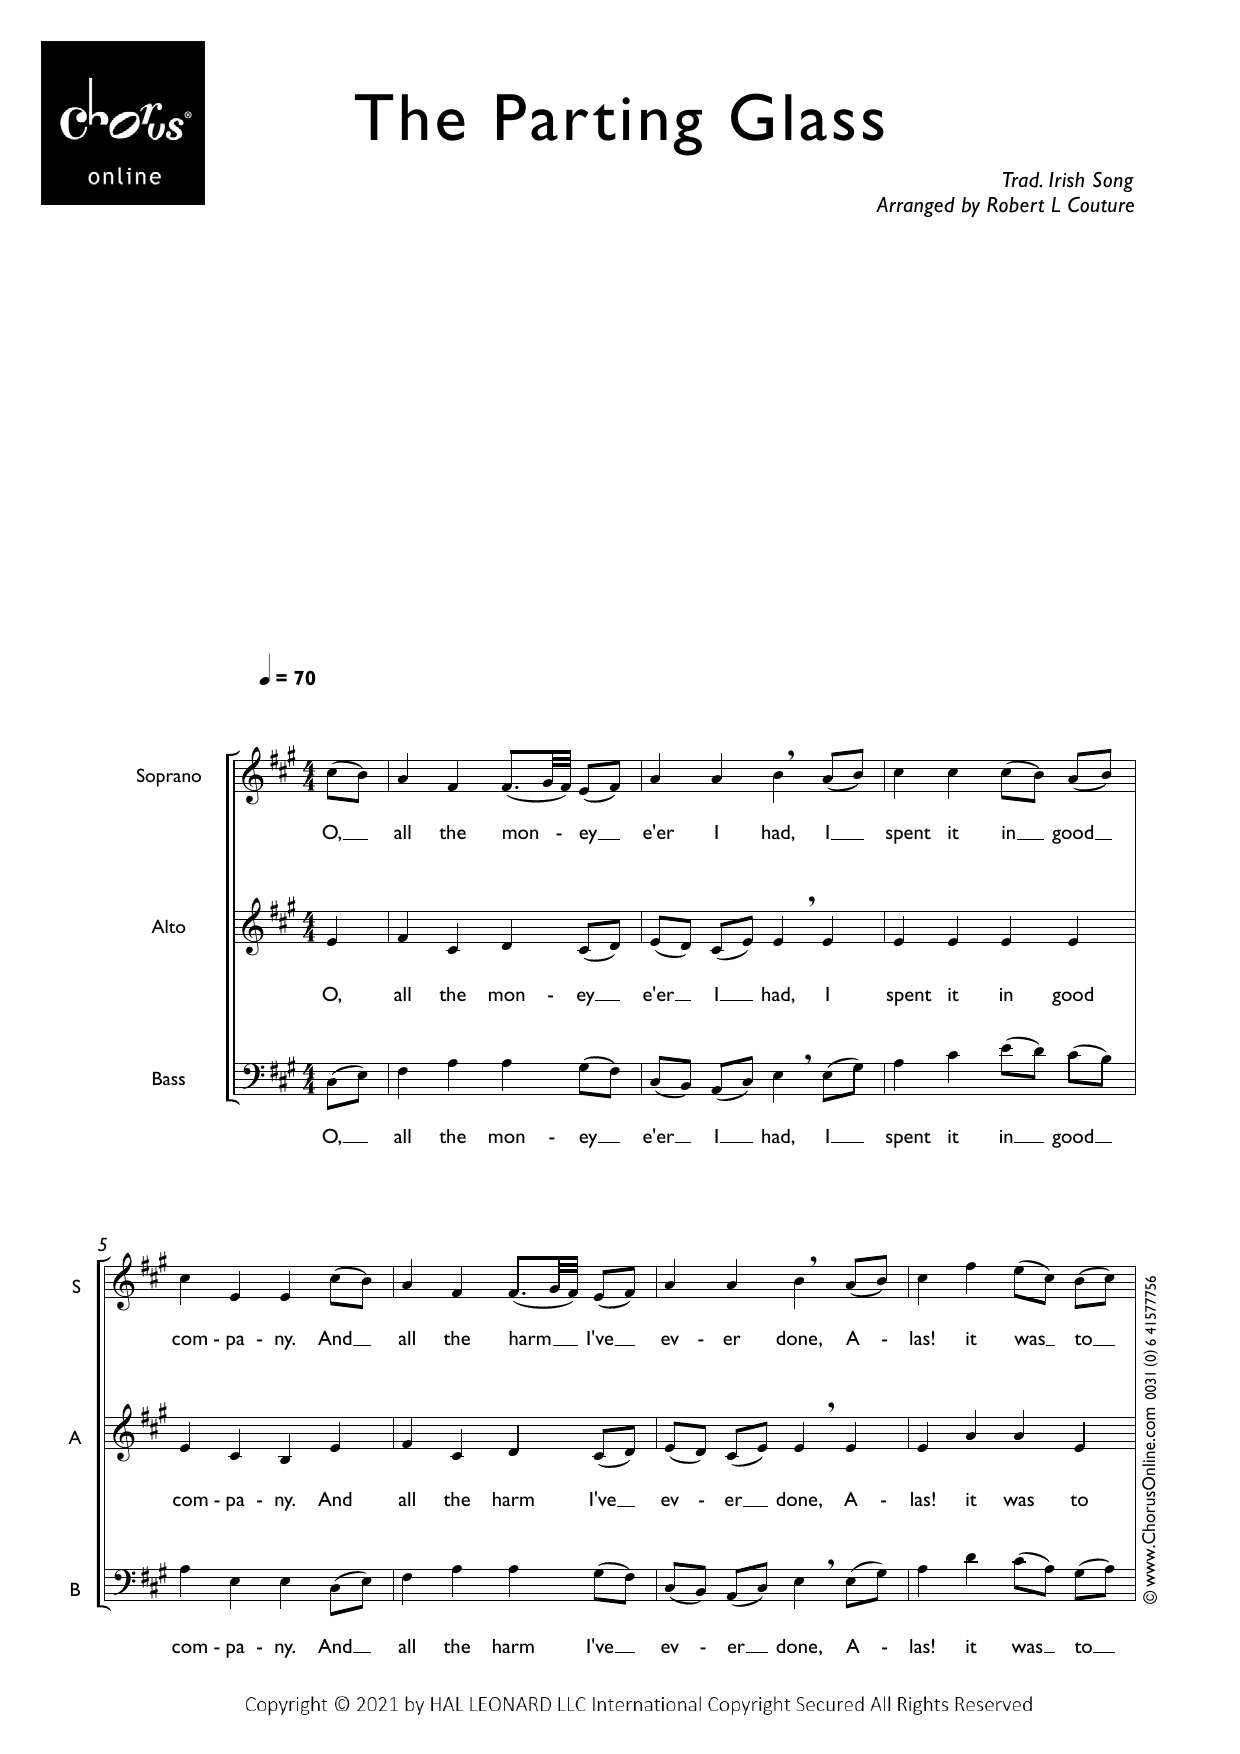 Irish Folksong The Parting Glass (arr. Robert Couture) sheet music notes printable PDF score